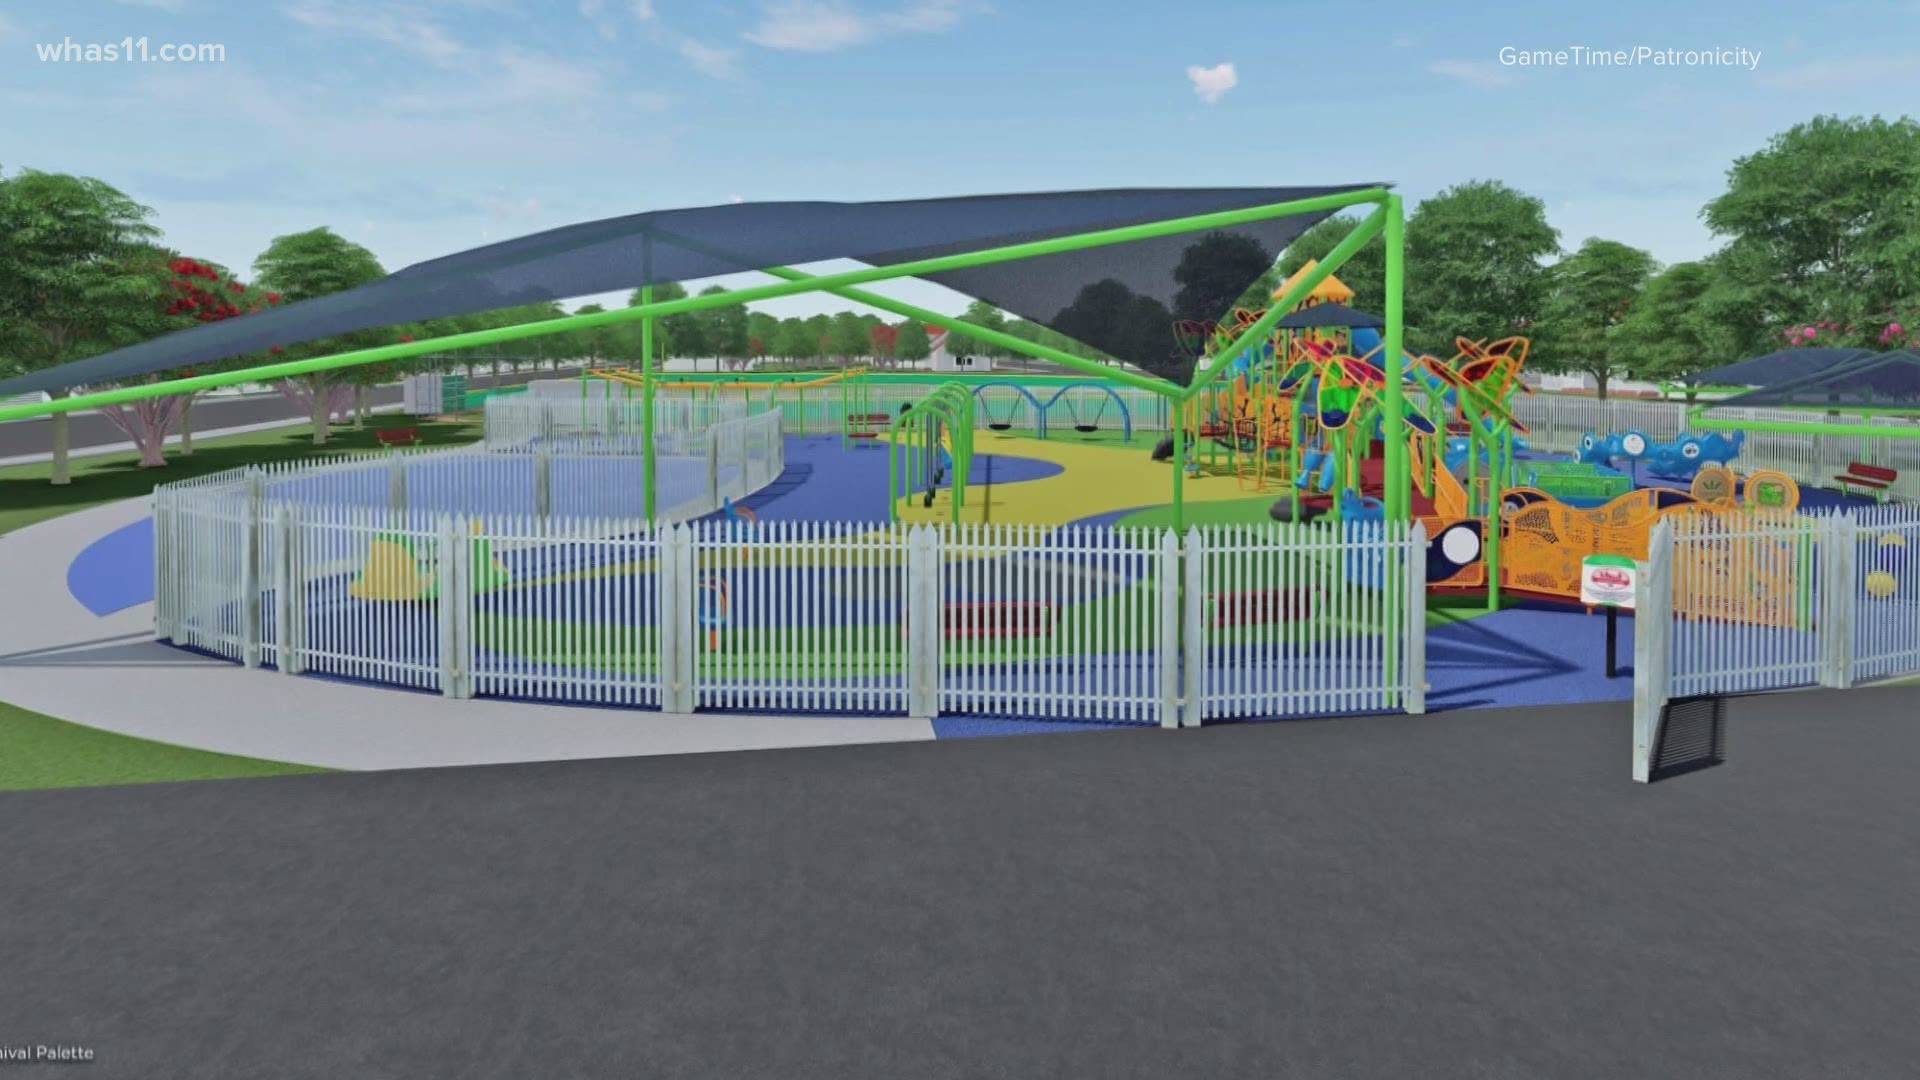 The new playground will be built at the Kevin Hammersmith Memorial Park starting this summer if the community can raise enough money.